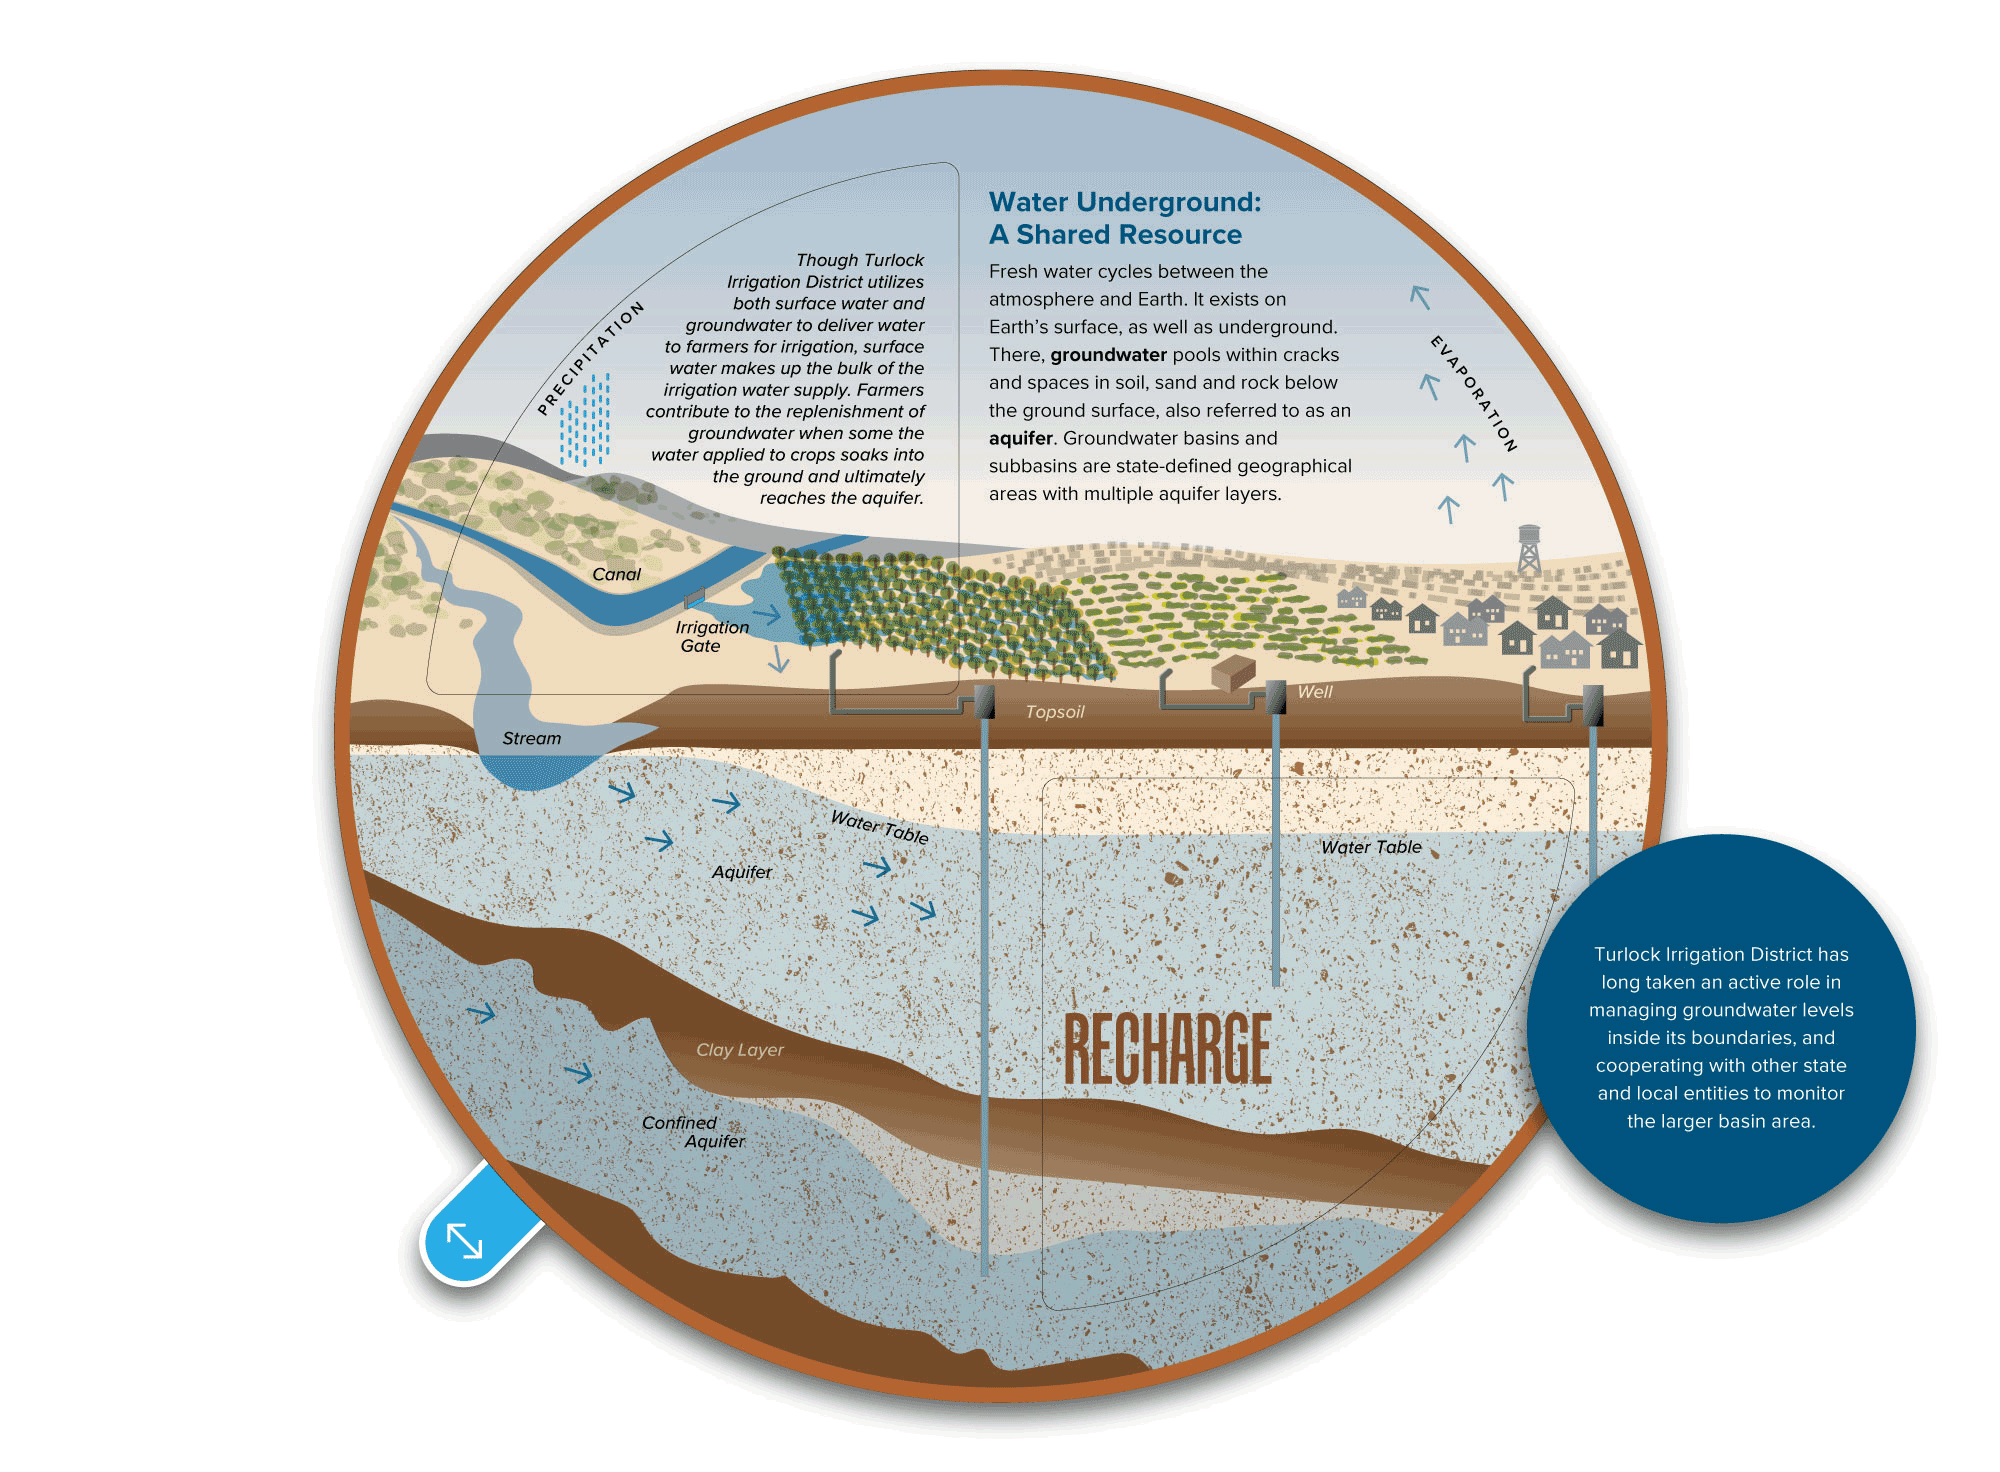 Groundwater radial diagram animated to show recharge and depletion states